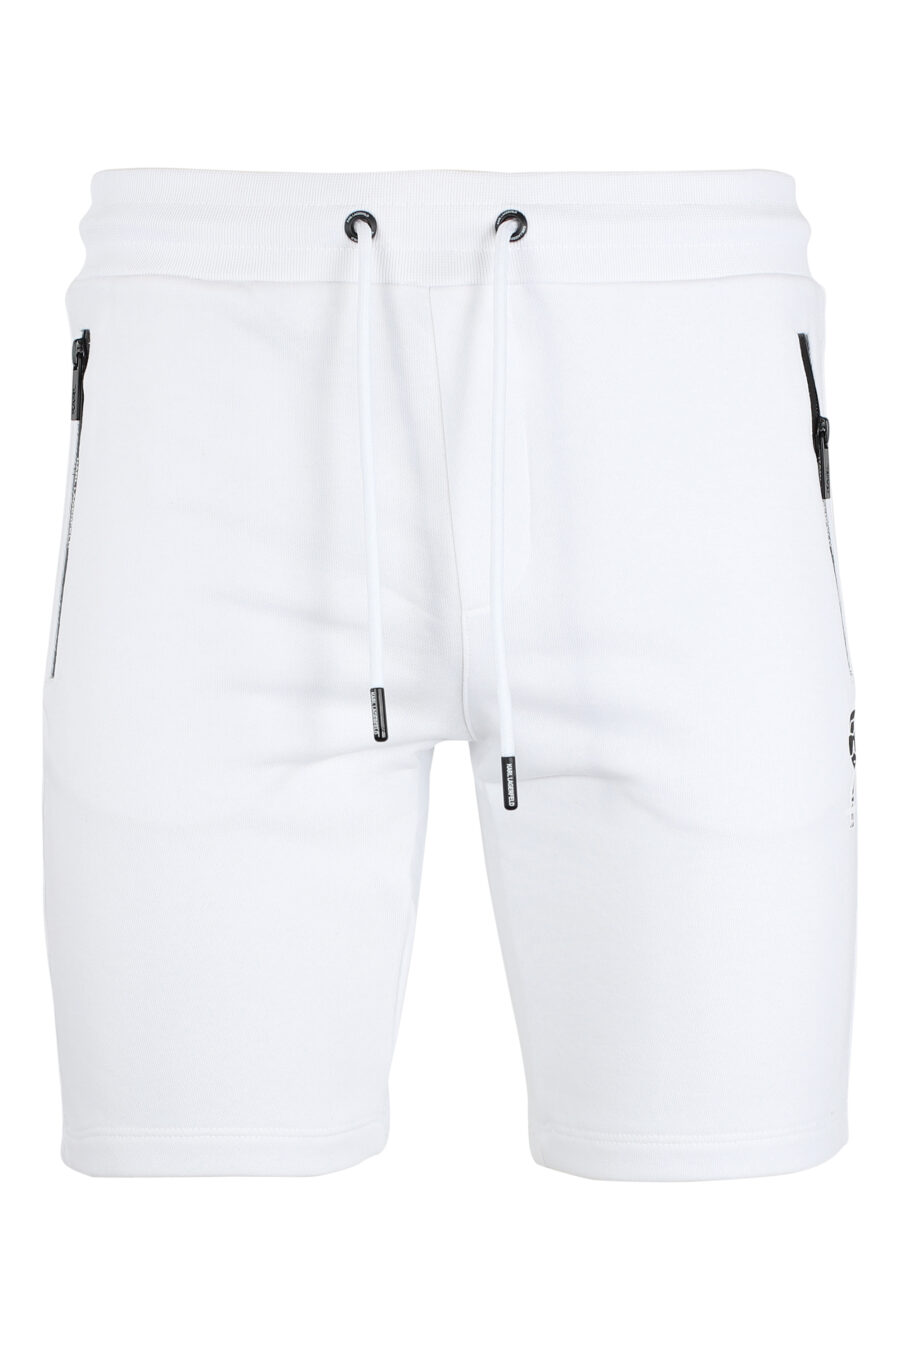 Tracksuit bottoms white short with "karl" minilogue in black silhouette - IMG 9514